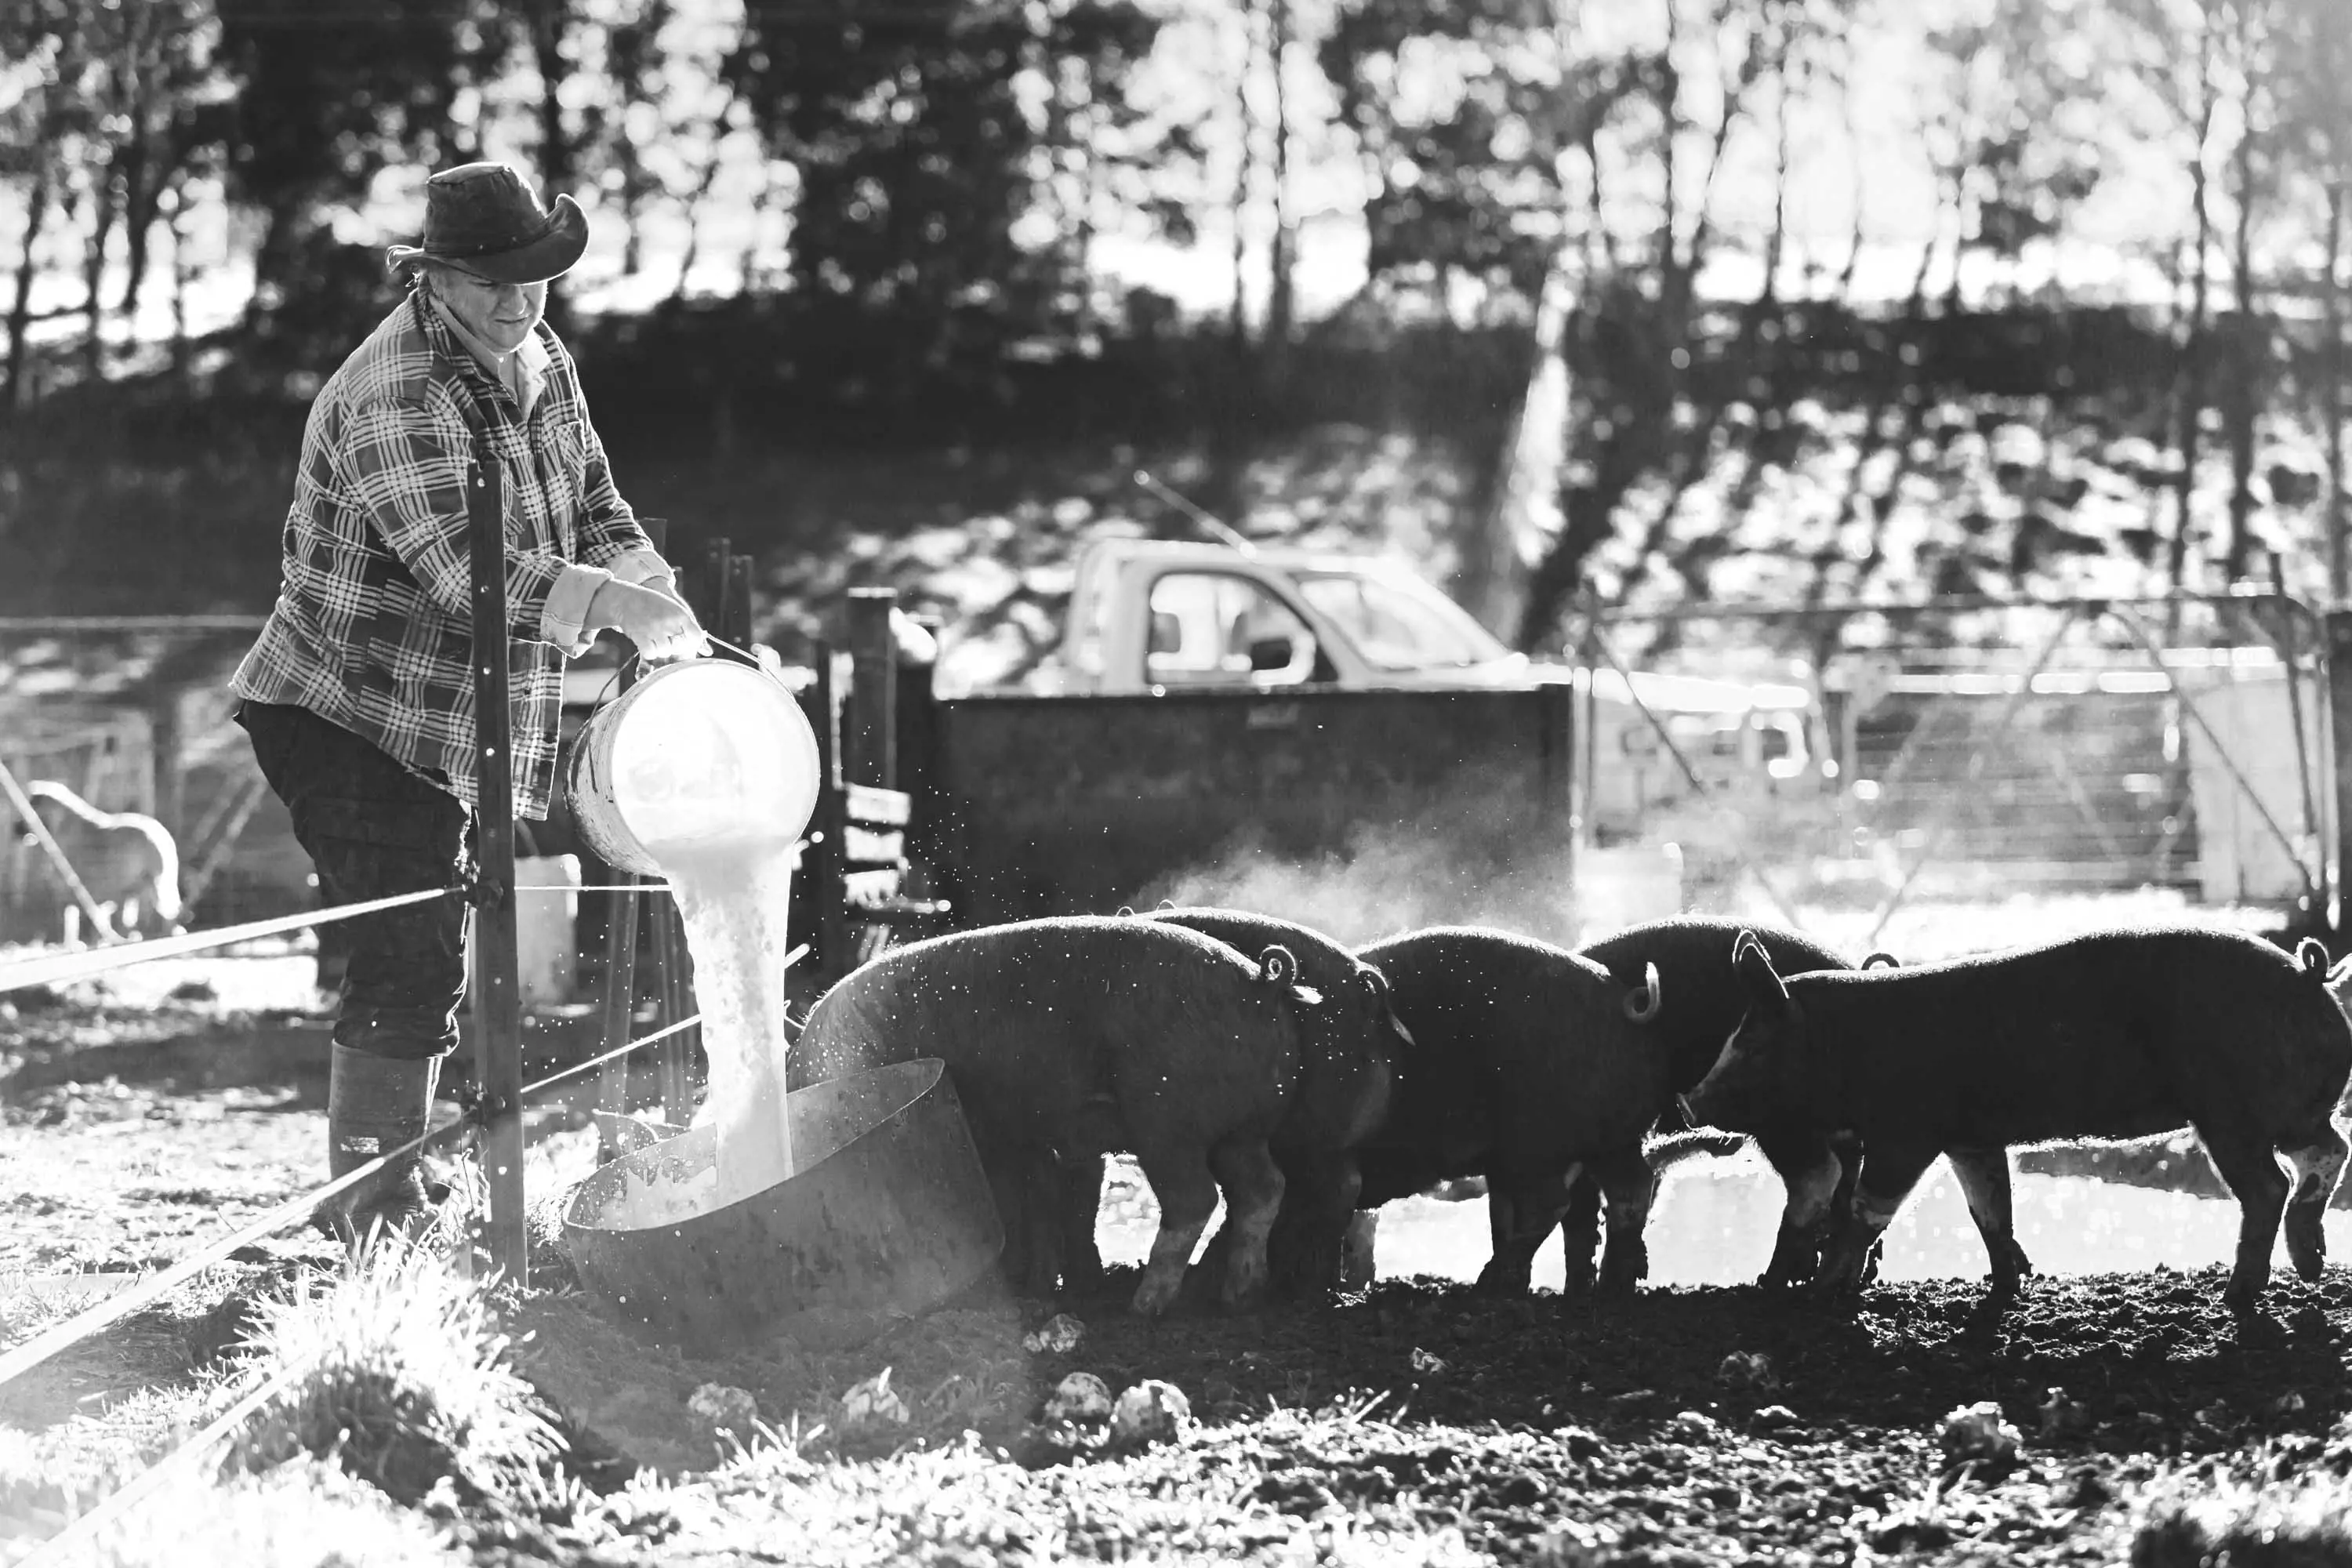 A farmer pours food into a large metal drum in a enclosure holding 5 large pigs. 